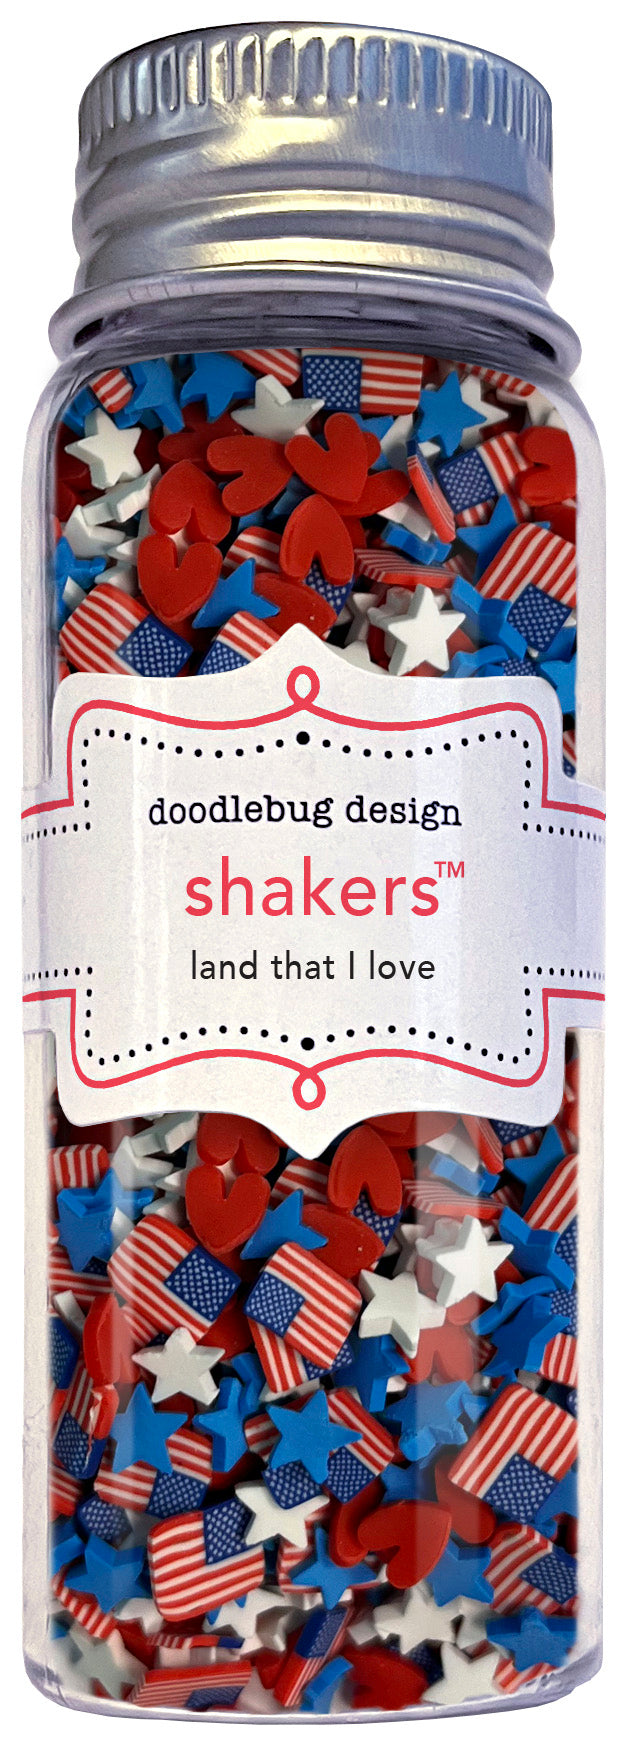 Land that I Love Shakers